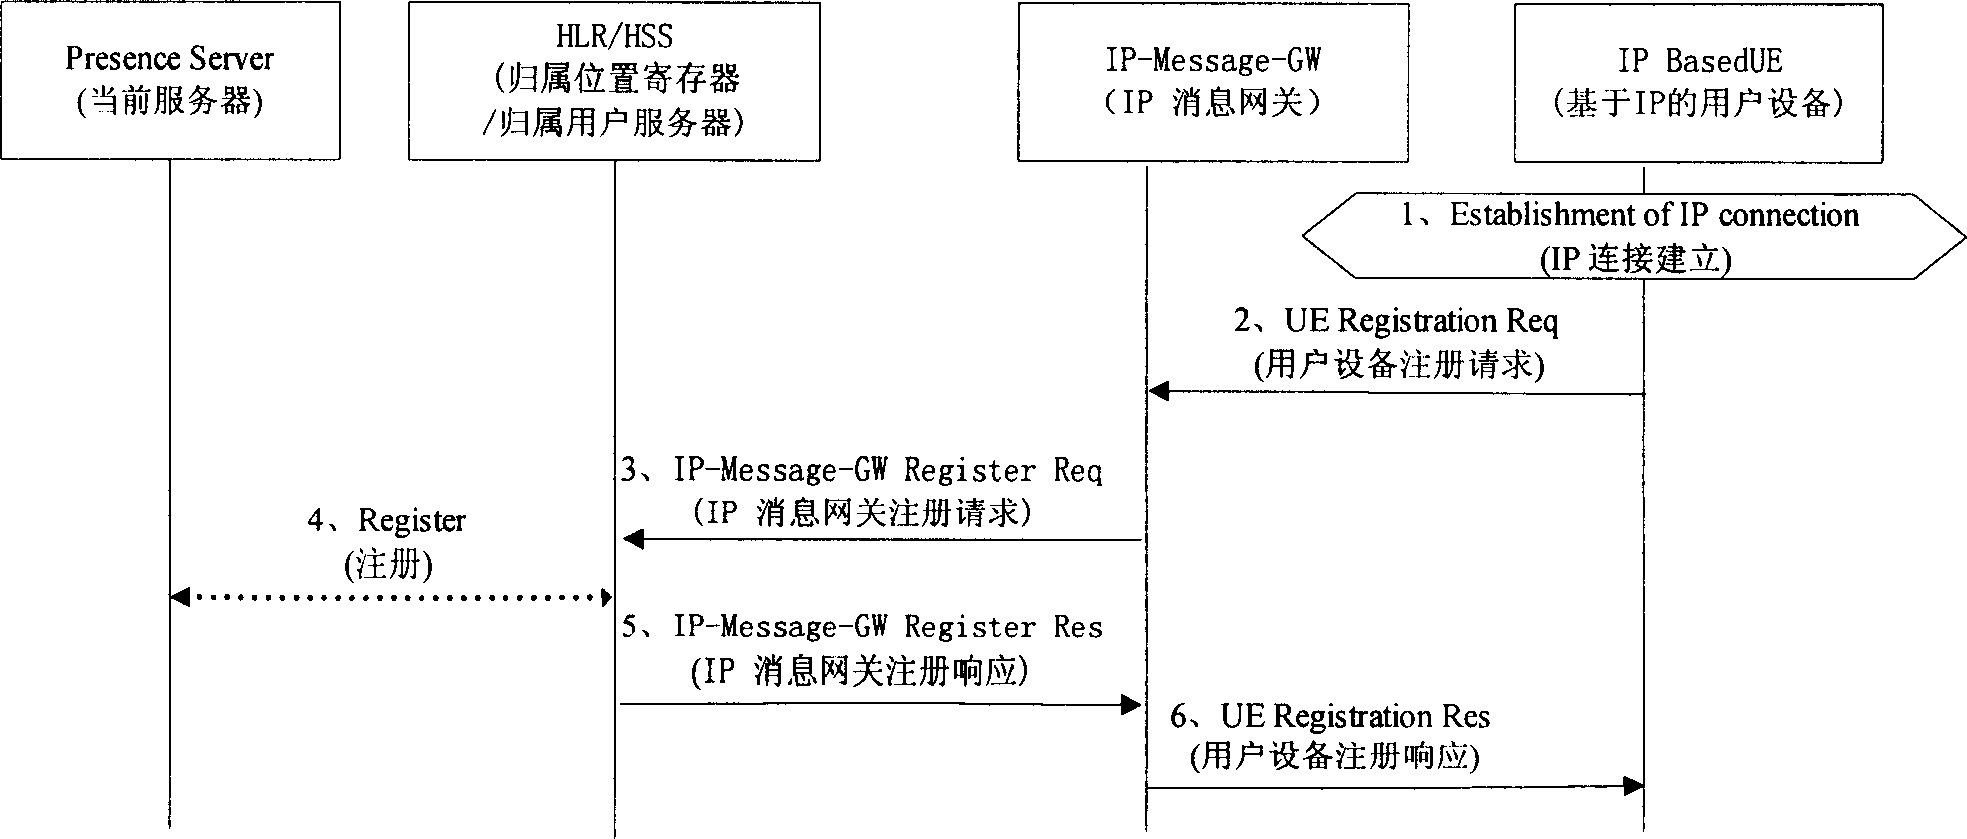 Method for IP user realizing mobile data service based on IP access